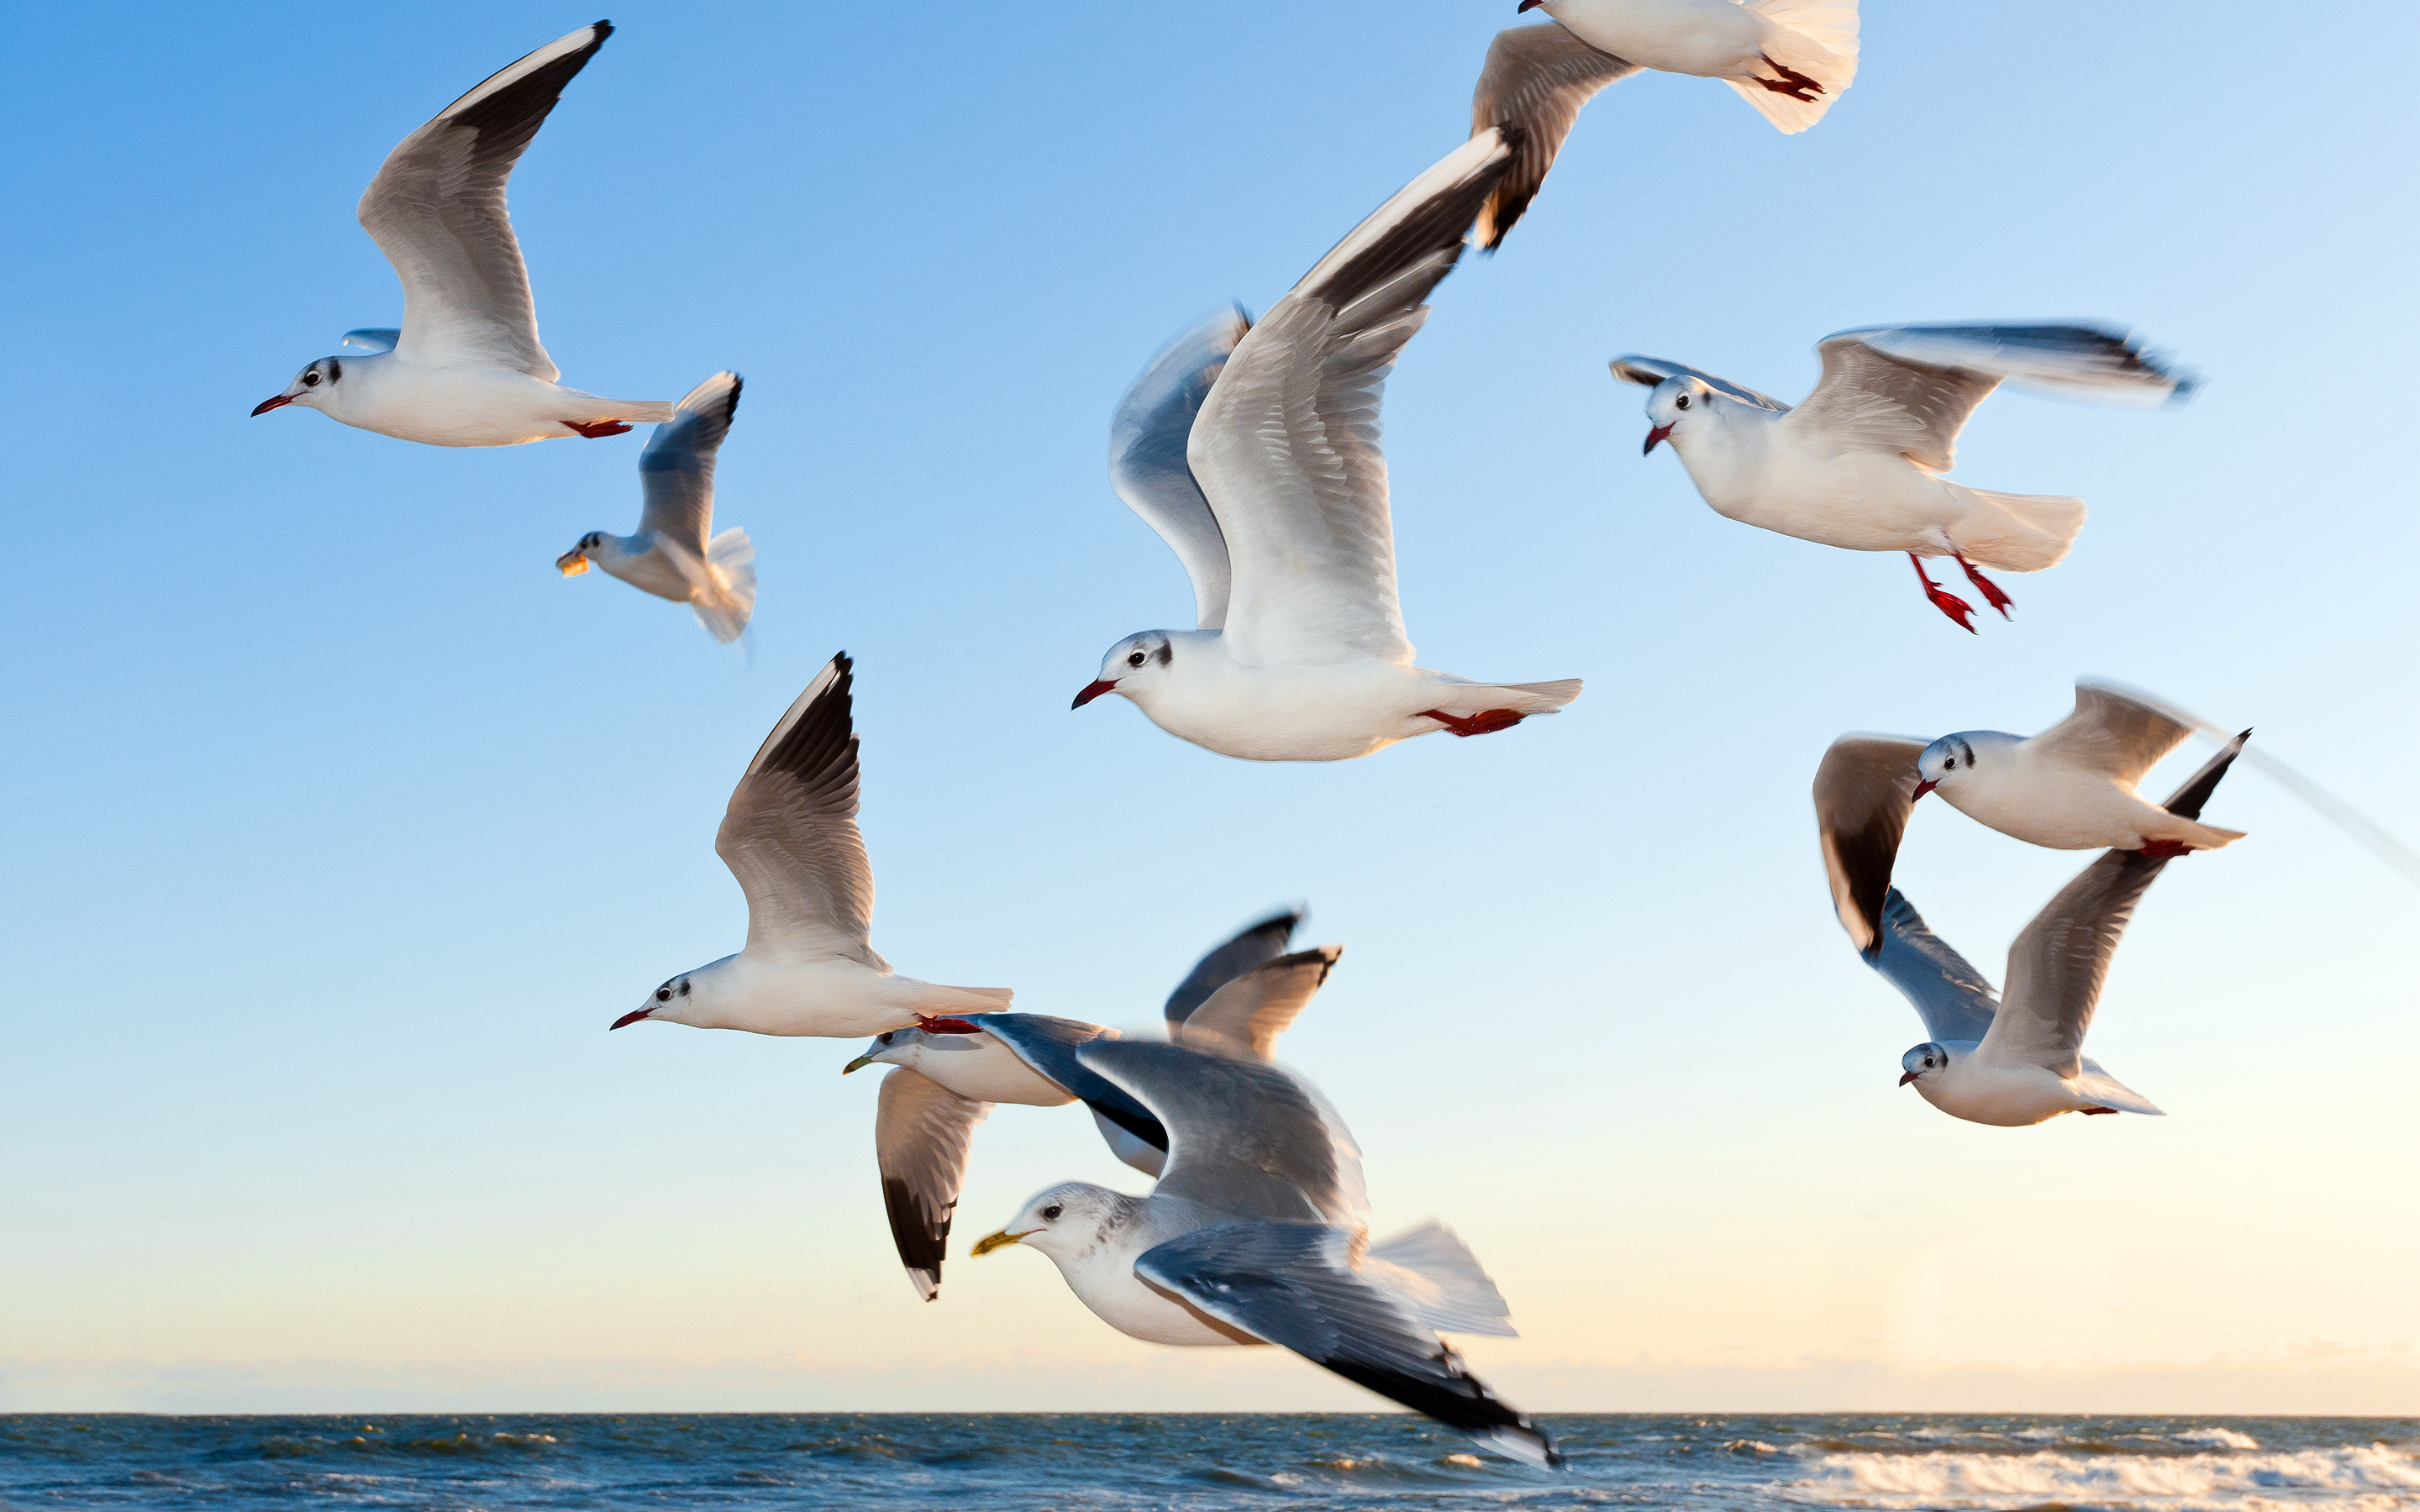 Seagulls Wallpapers | HD Wallpapers | ID #16375